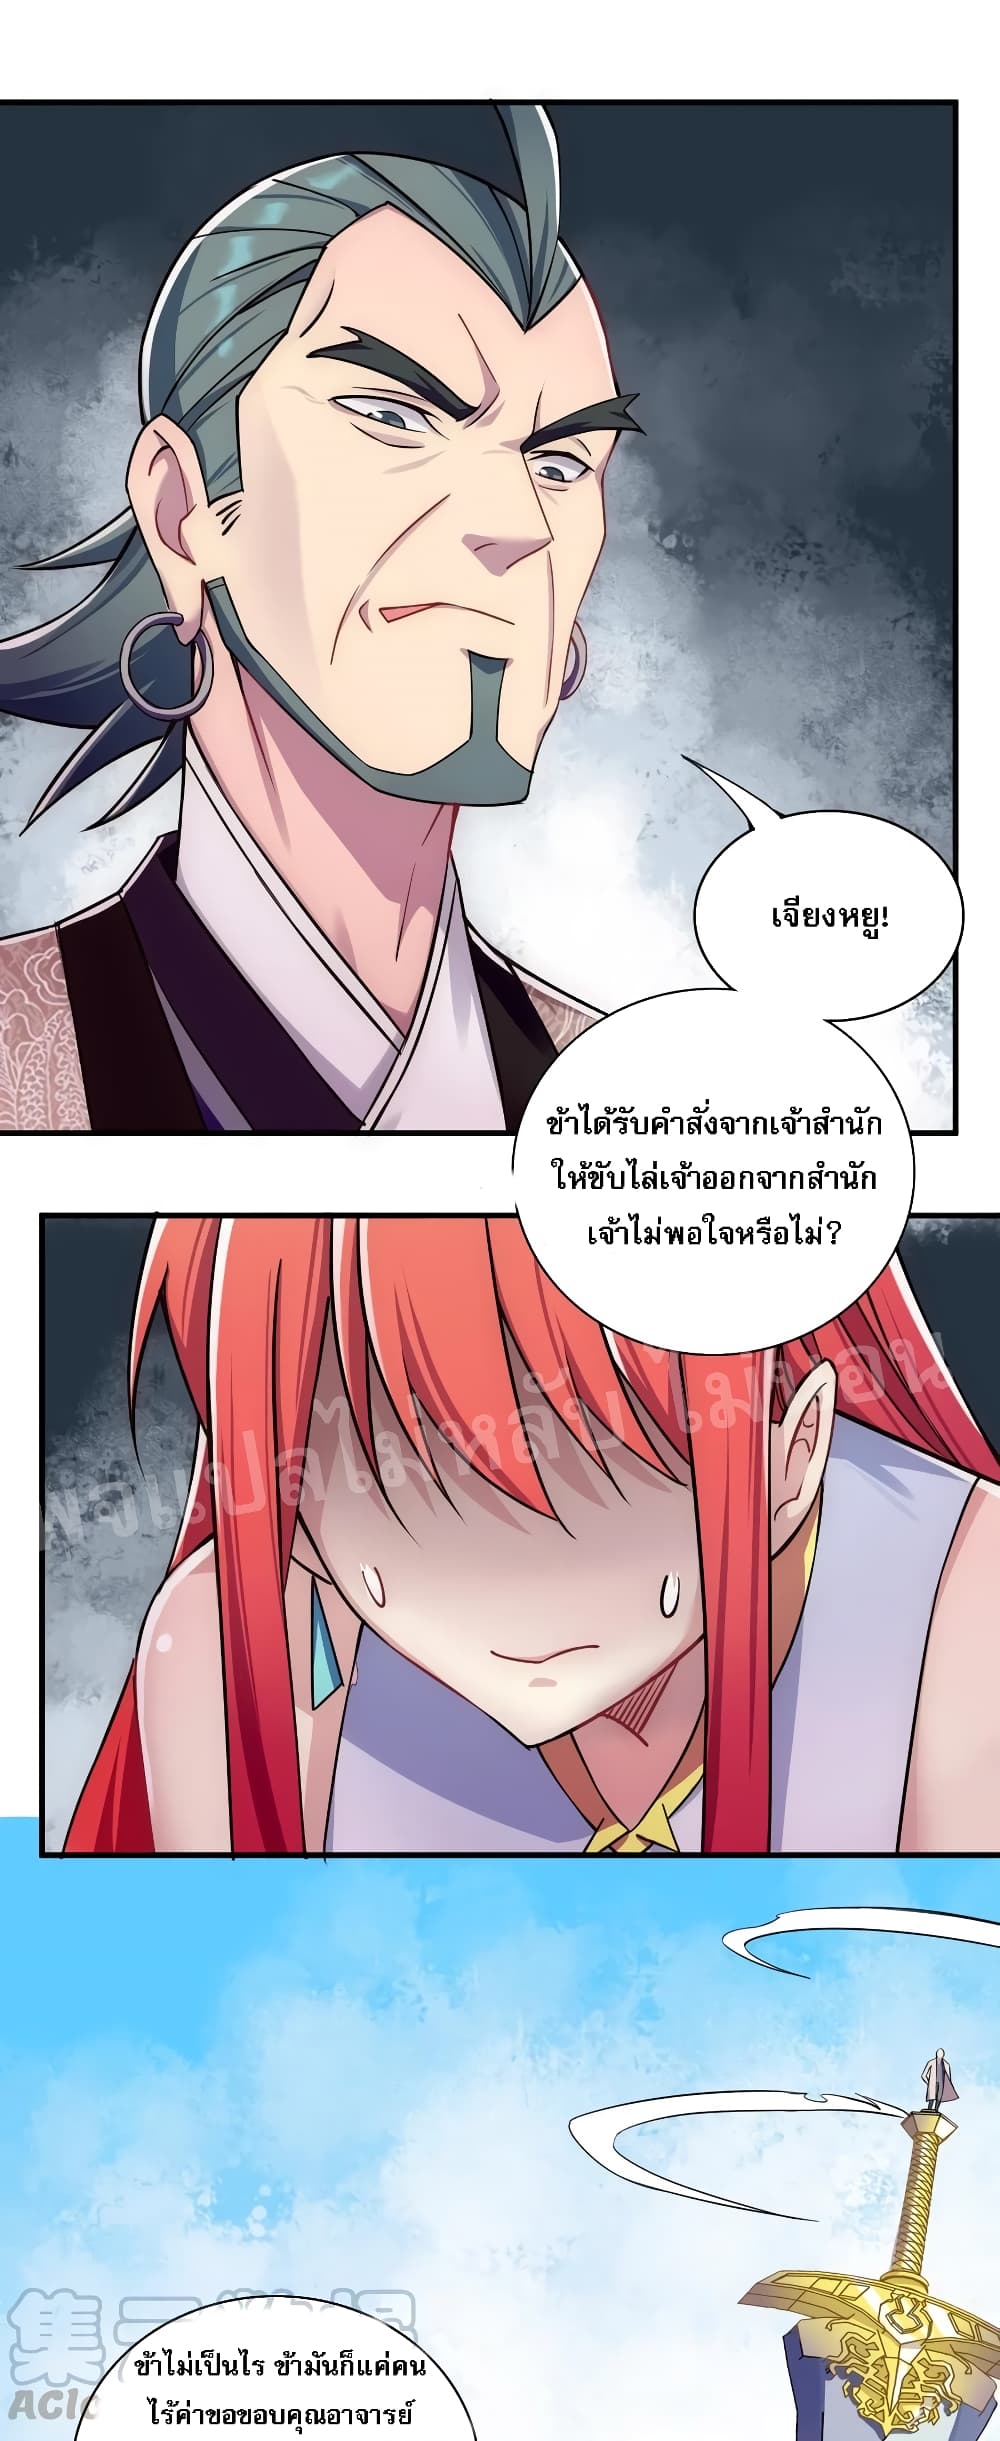 Rebirth as the Strongest Demon Lord 11 (7)